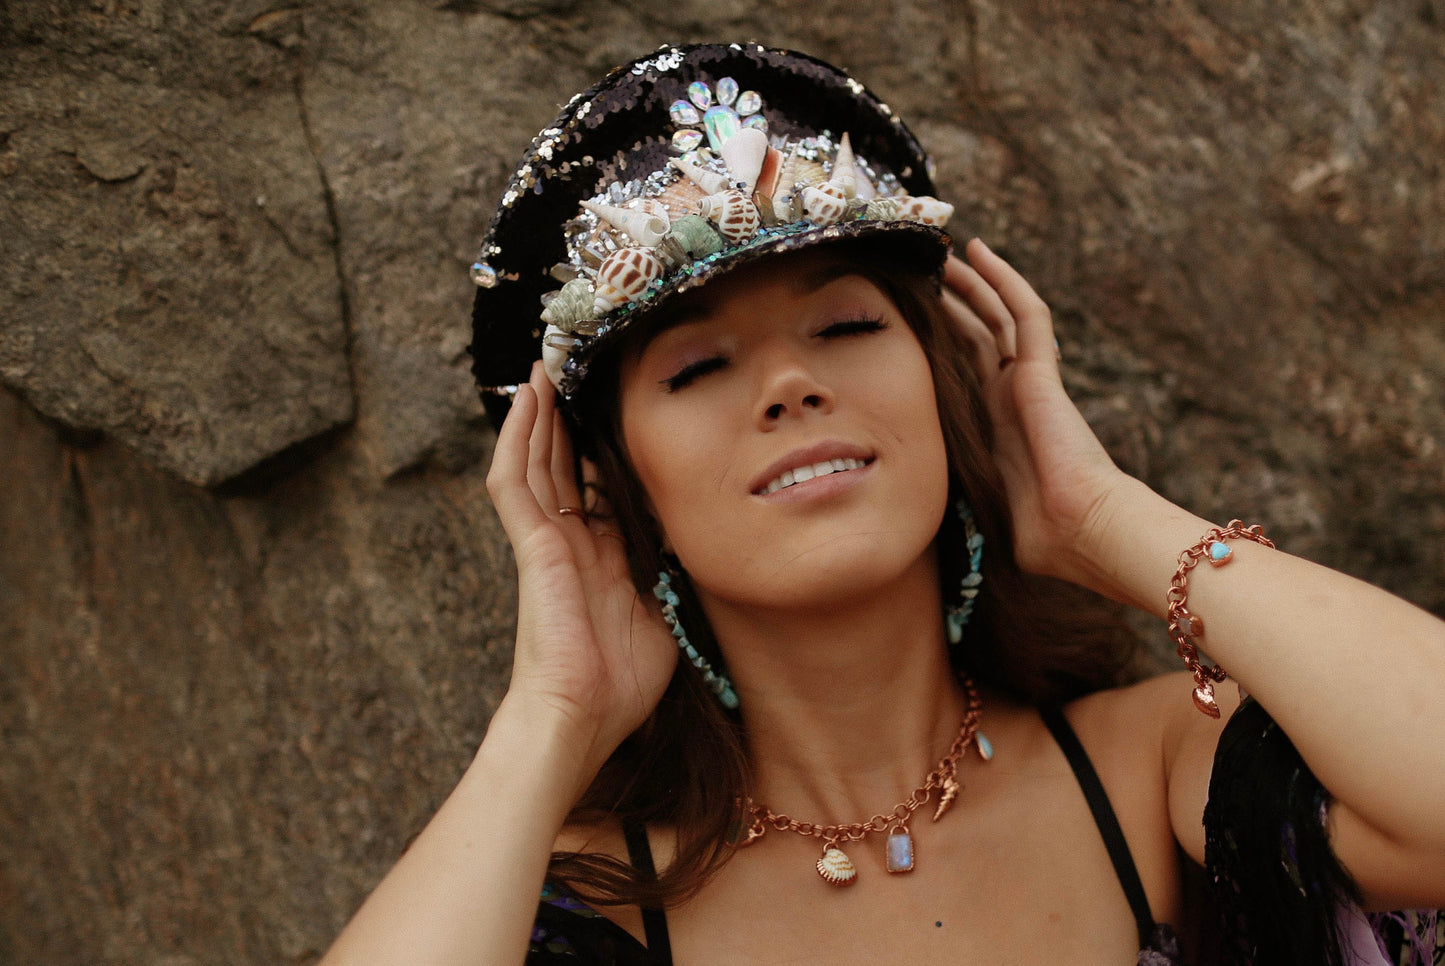 Embellished by hand with seashells, crystals and ombre glitter, these hats are truly unique! Get ready to dance the night away with these one-of-a-kind creations, made with love and care.